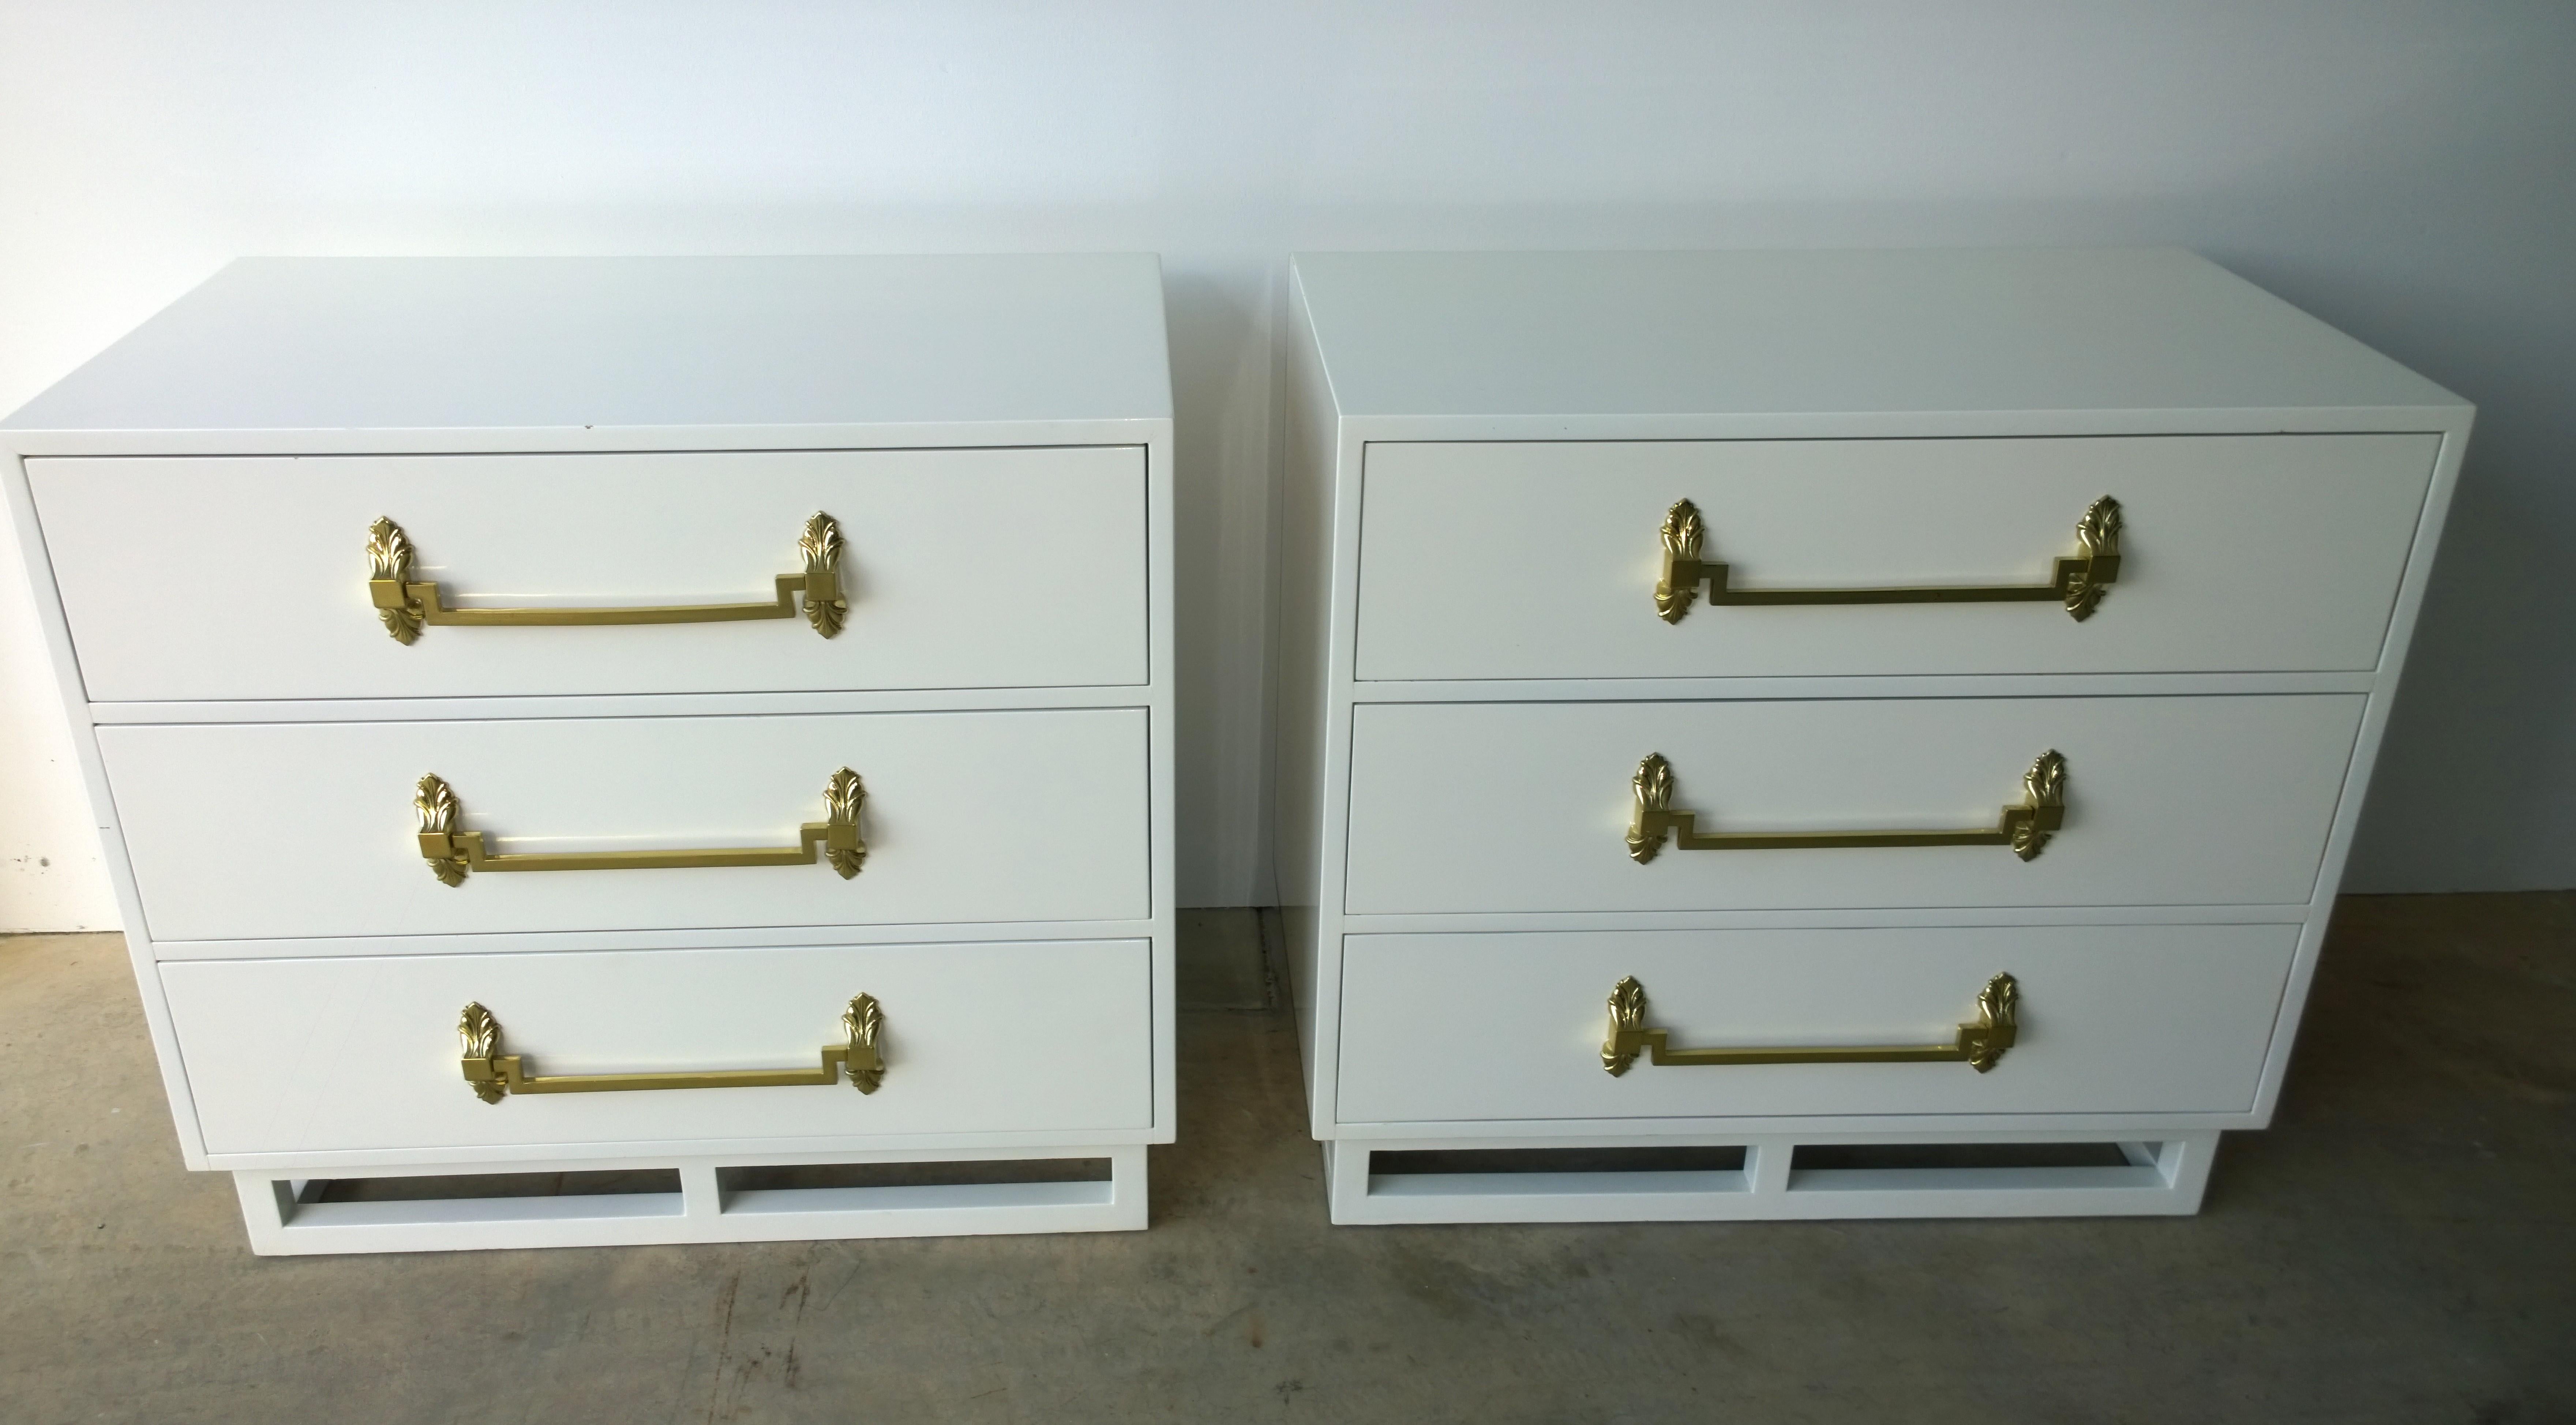 Offered is a pair of Hollywood Regency or Mid-Century Modern signed Grosfeld House lacquered wood in white with brass decorative hardware chest of drawers / night tables / dressers. The pair sit on an open lacquered wood plinth base. This gorgeous